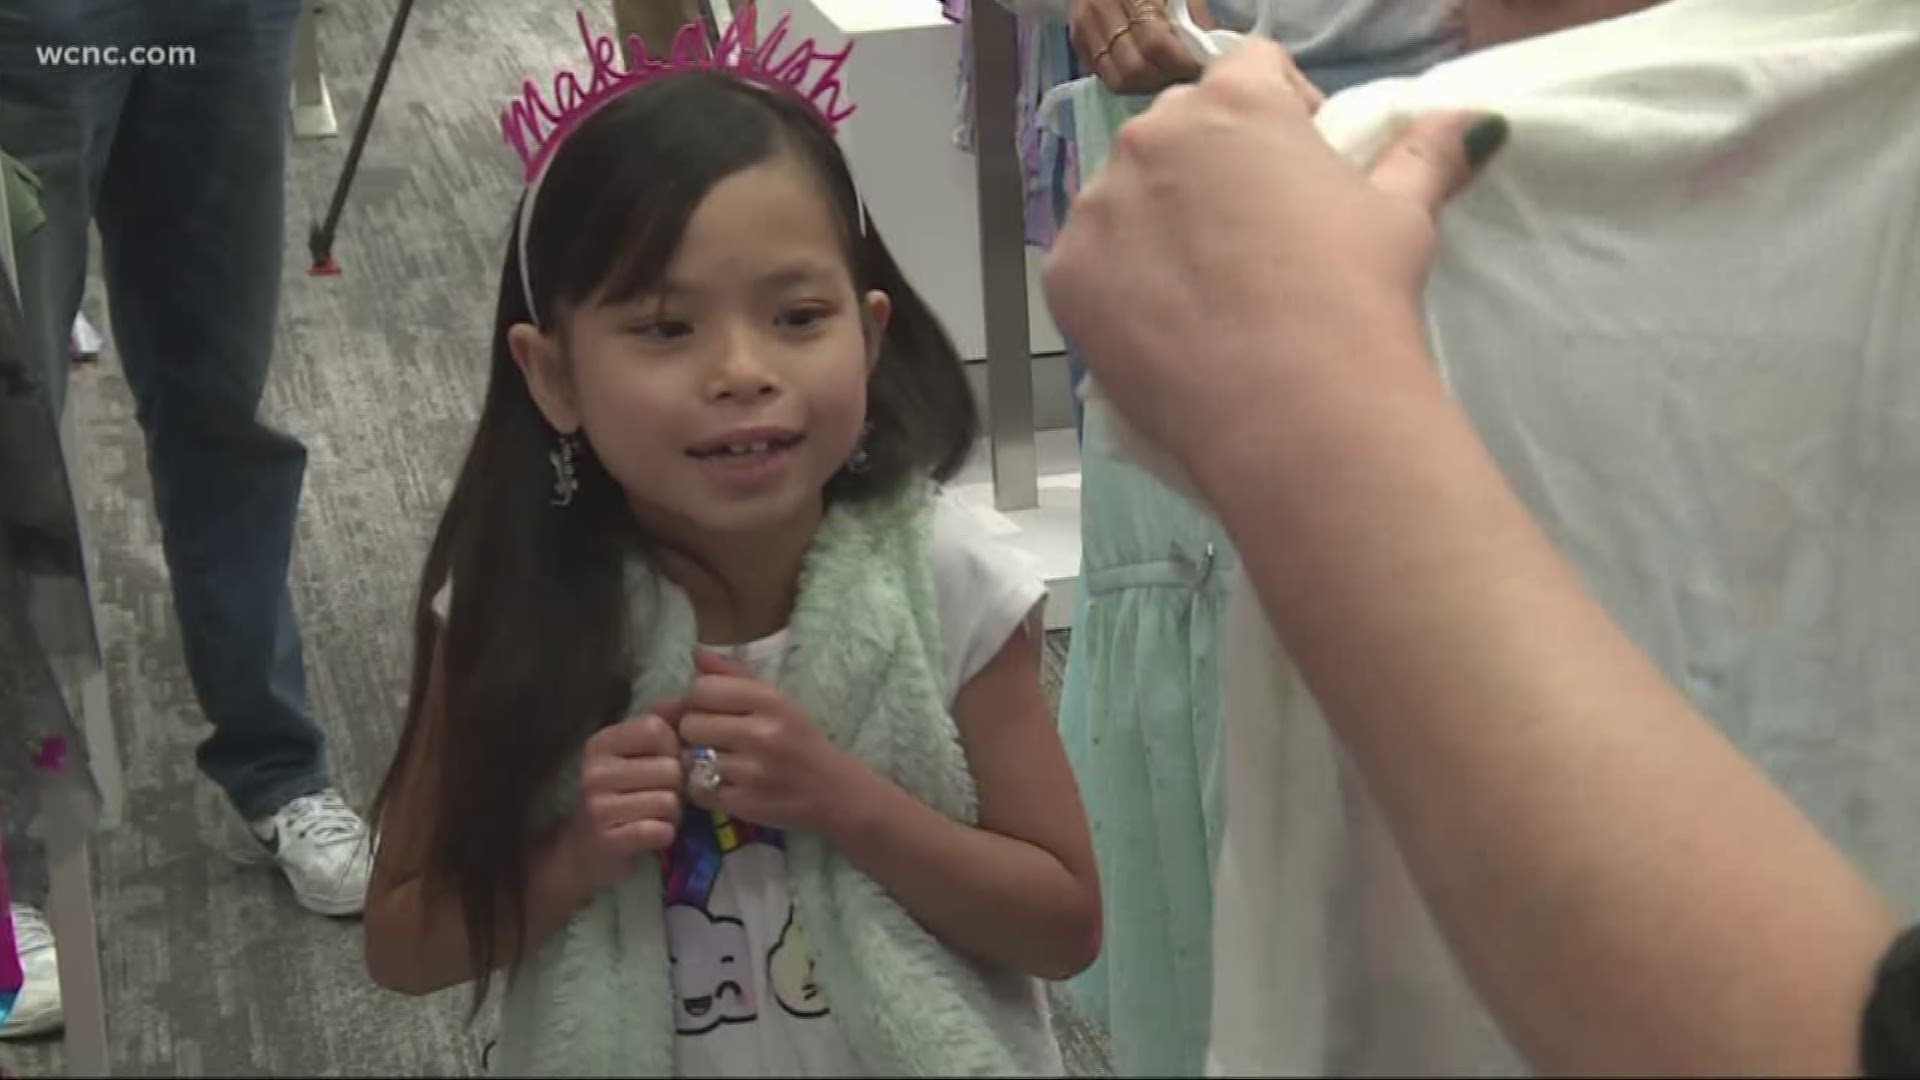 Nine-year-old Gracelyn Traver knew right away what she wanted for her special day.